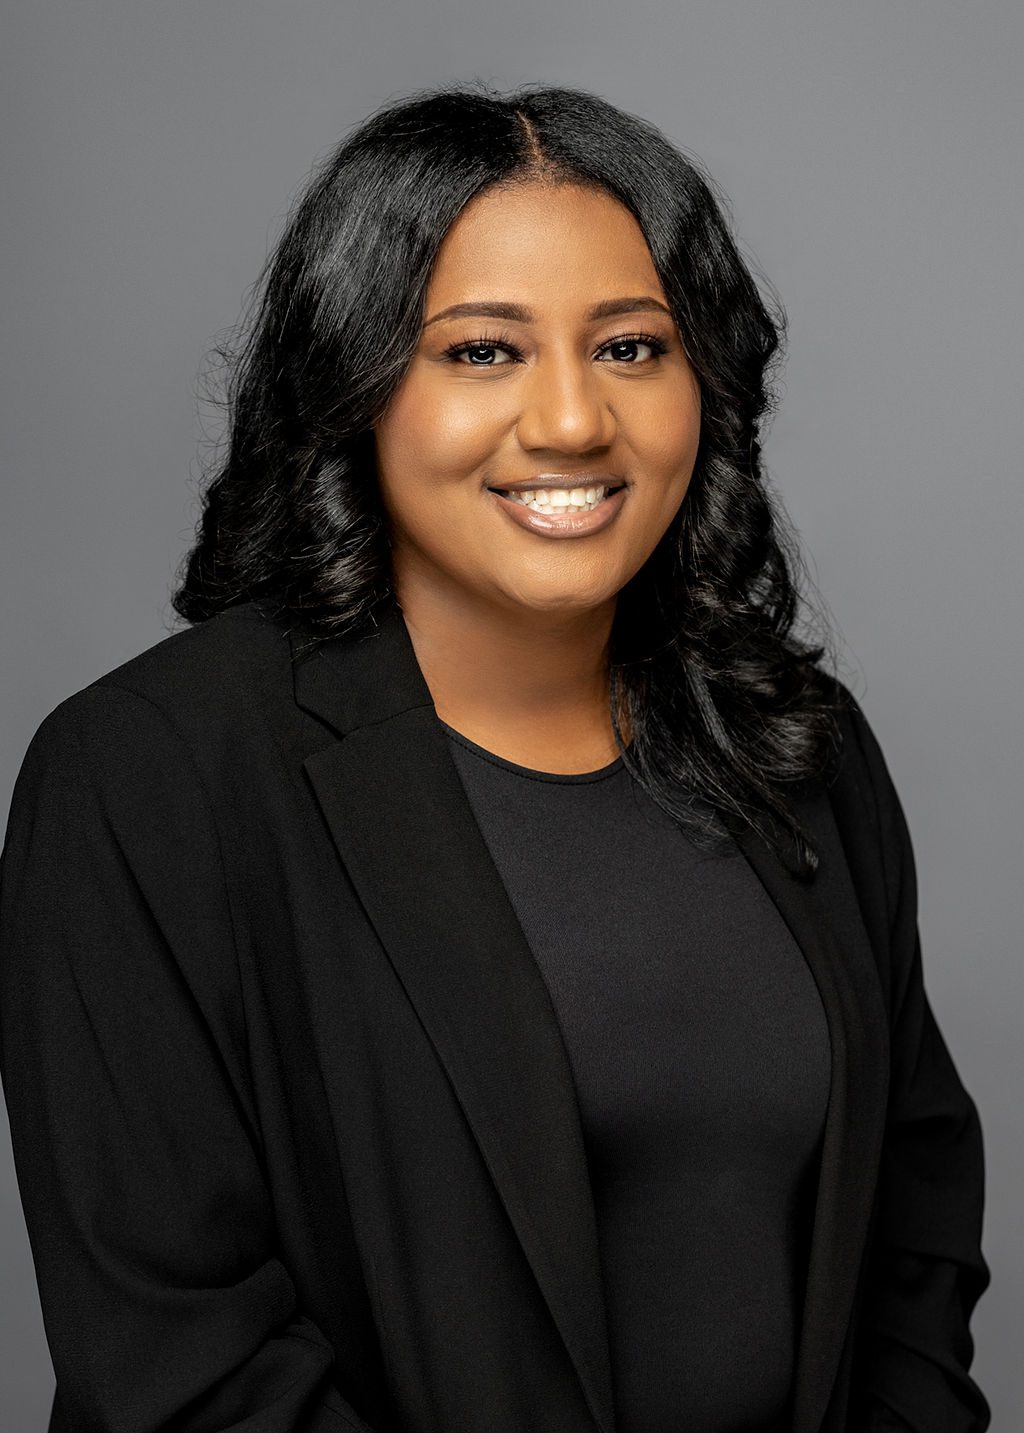 This photo is a professional headshot of Cierra Howard. She is a Black woman with medium-length straight black hair in loose curls. She is wearing a black blouse with a black blazer on top of it. She is smiling and her arms are relaxed to her sides with her hands slightly crossed in front.